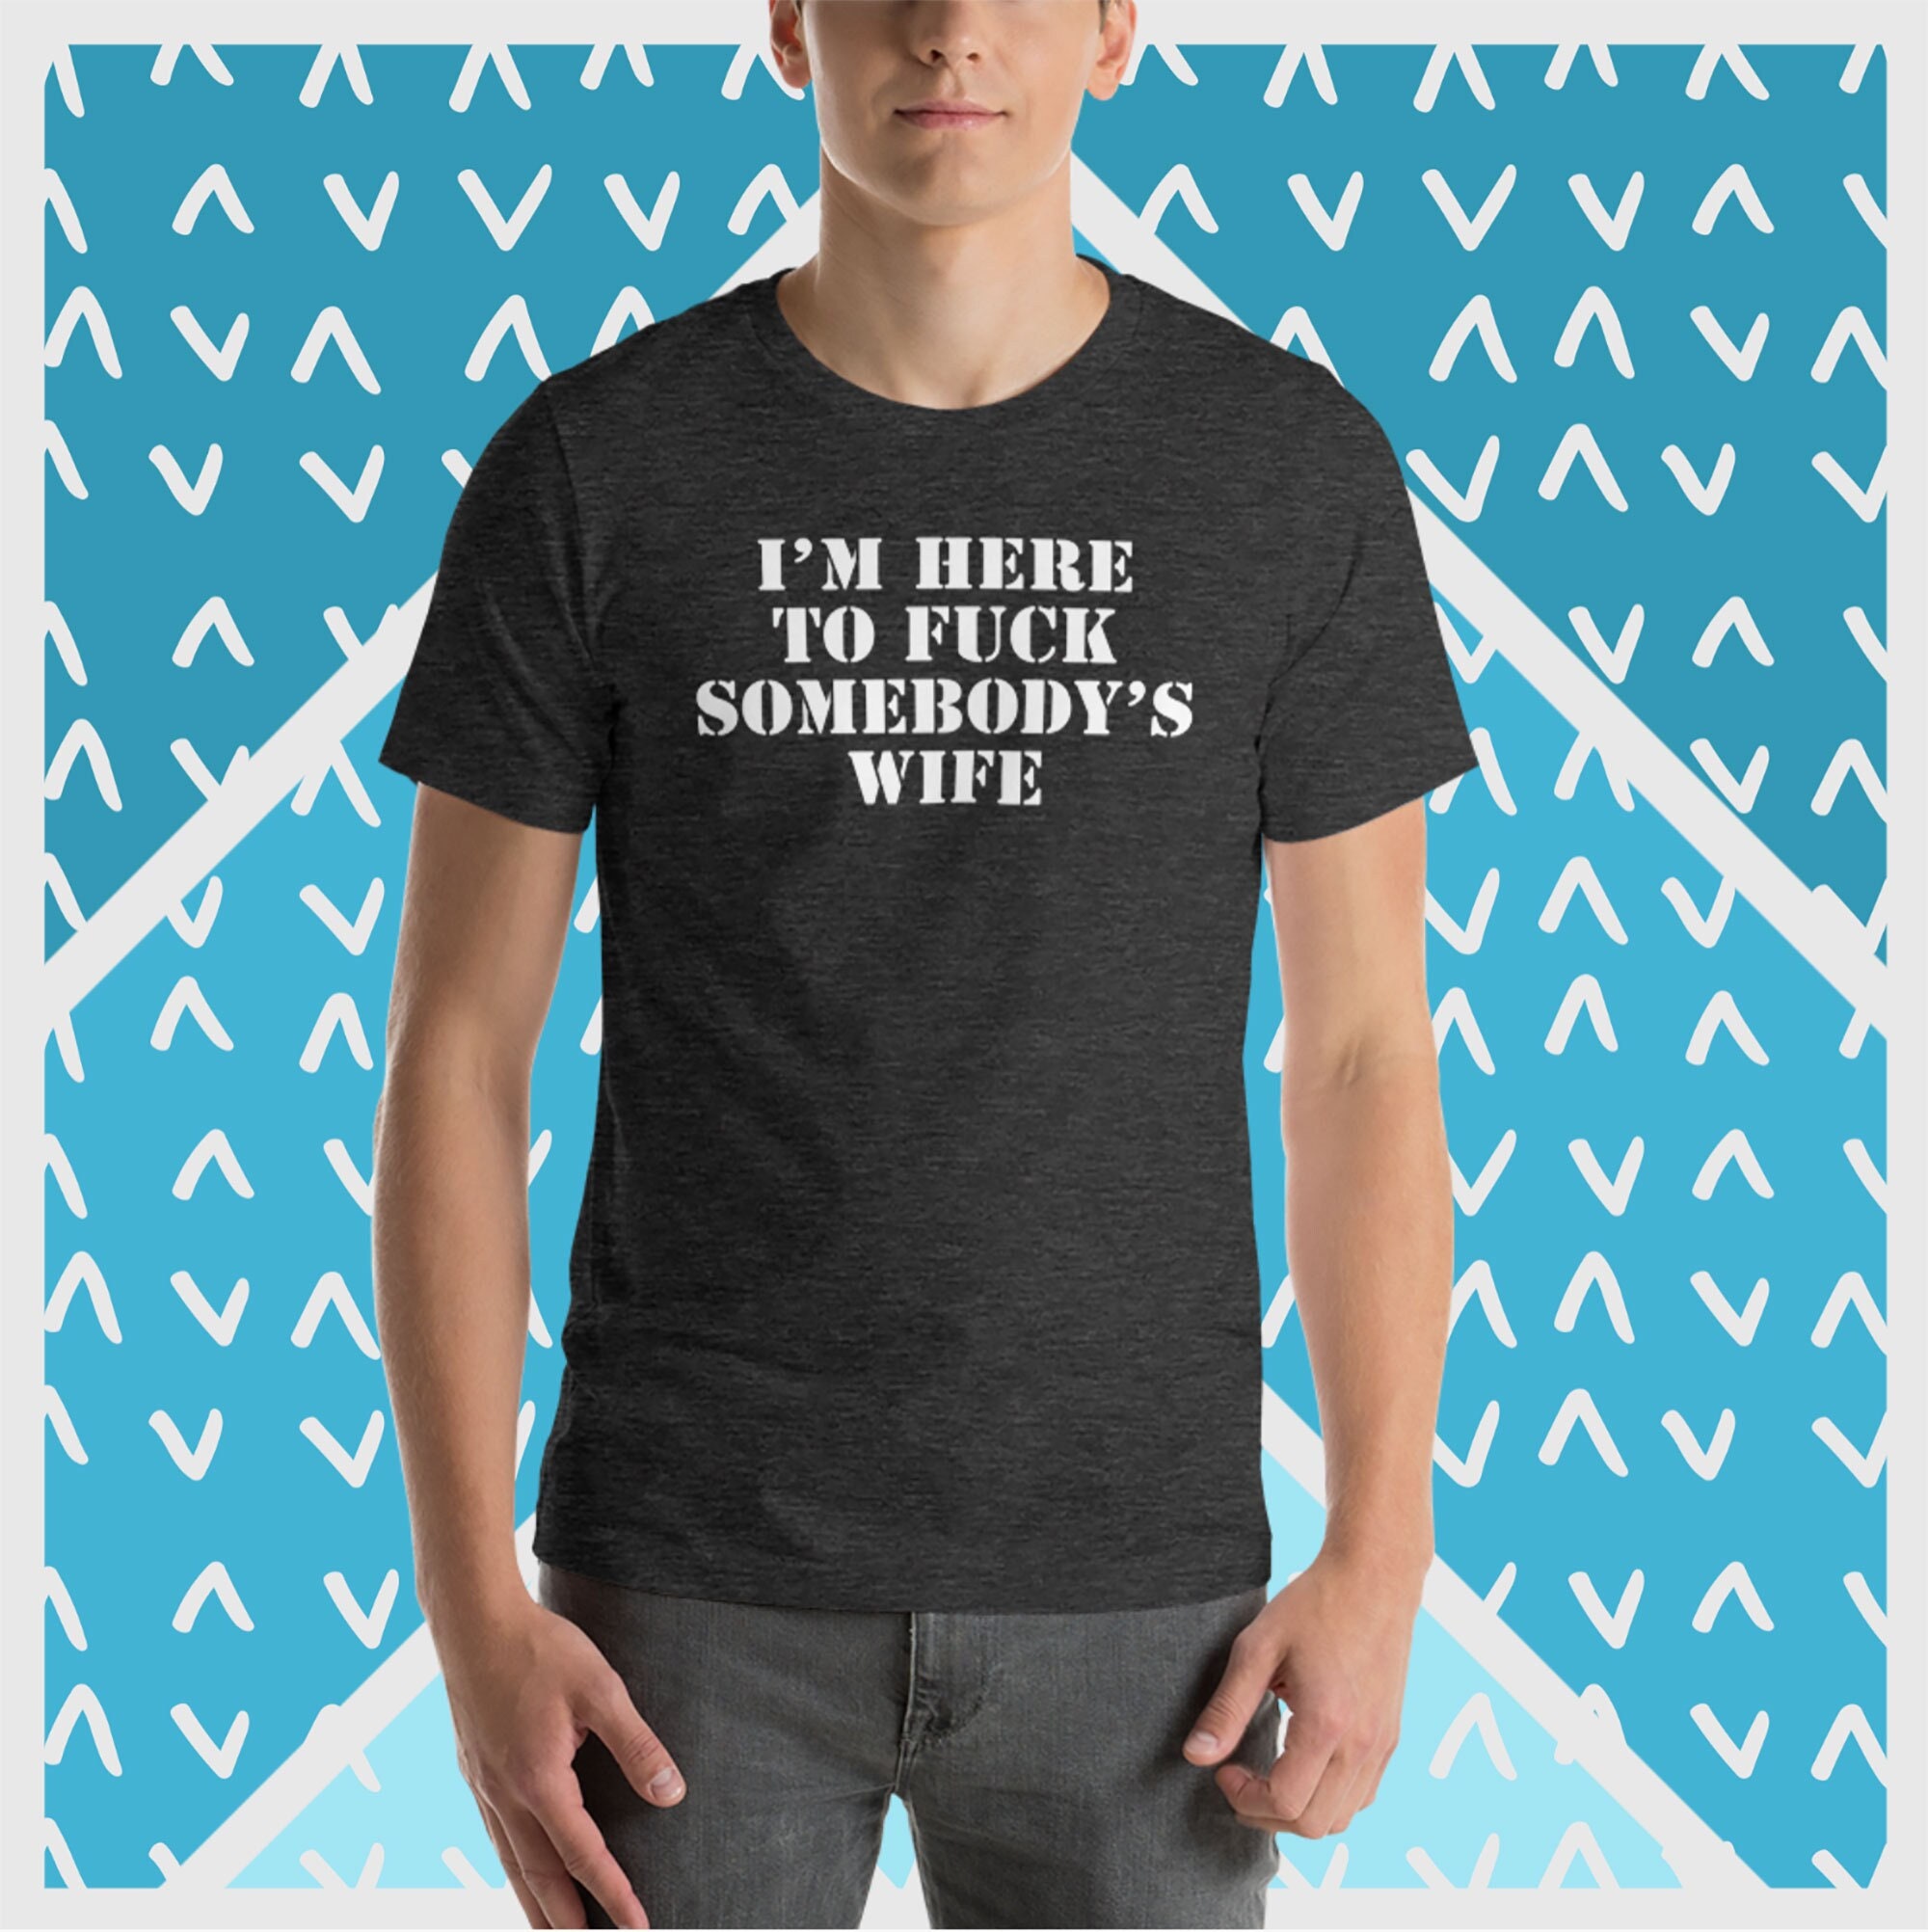 Im Here to Fuck Somebodys Wife T-shirt Funny hq nude picture